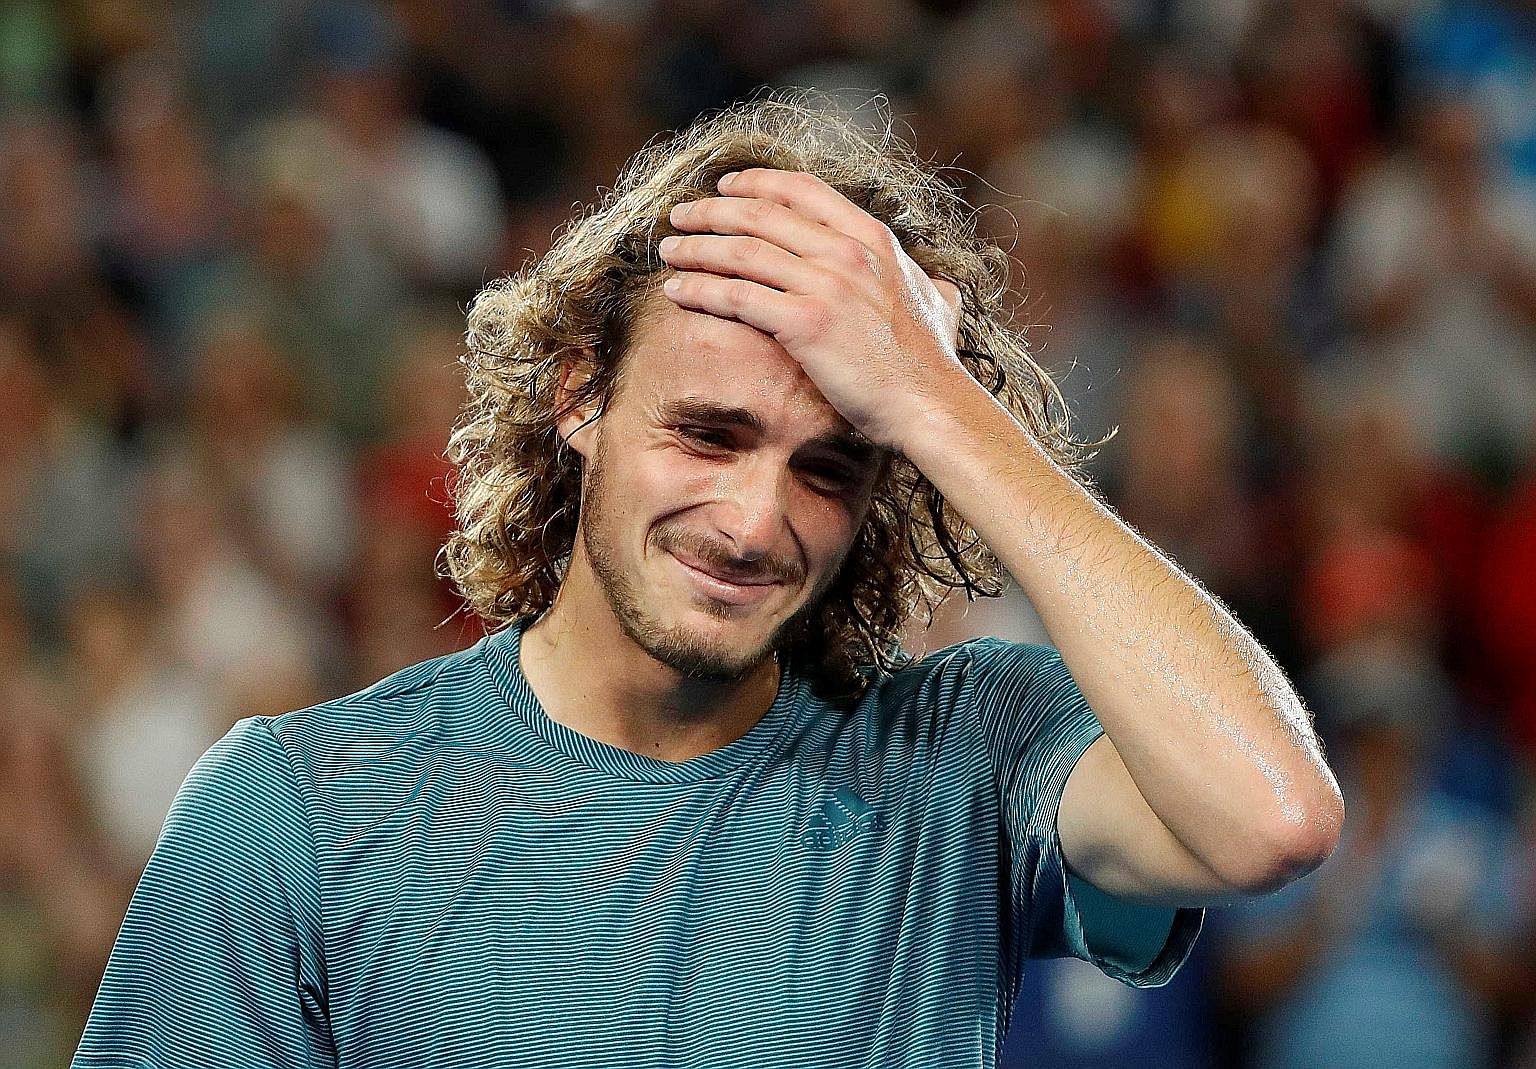 Greece's Stefanos Tsitsipas (left) in disbelief after his shock fourth-round win over defending champion Roger Federer at the Australian Open yesterday.